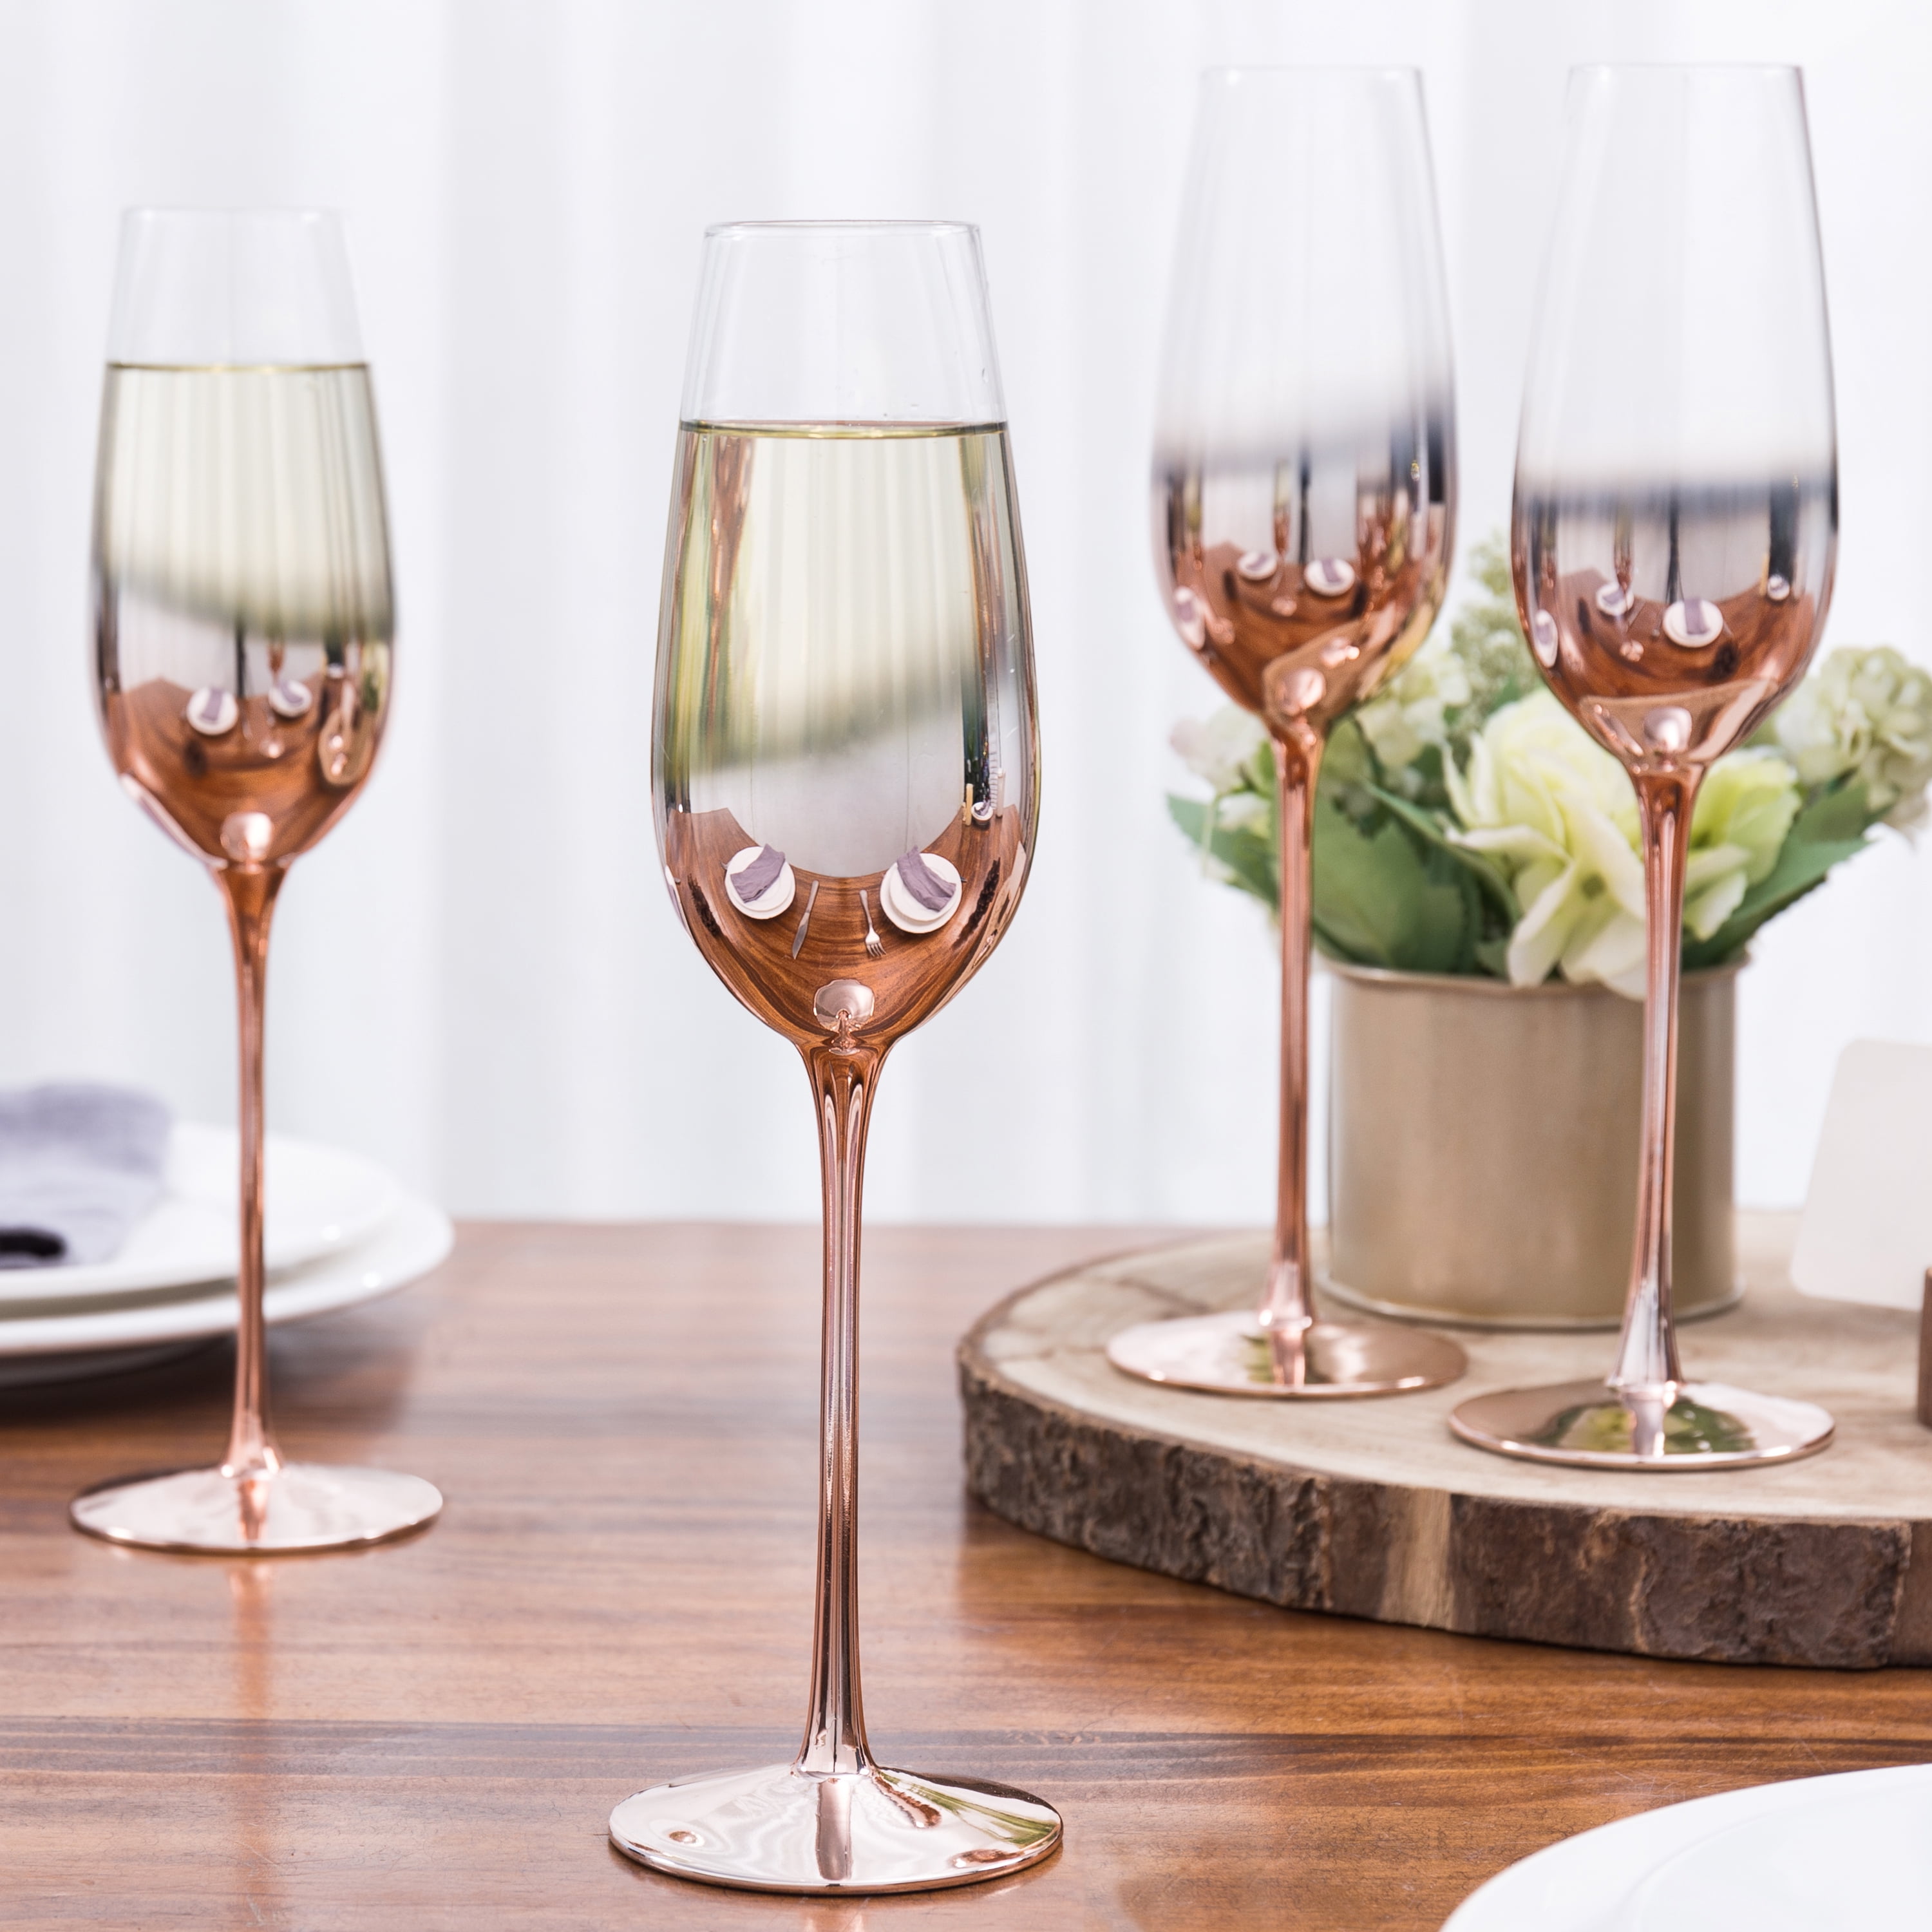 MyGift 8 oz Premium Quality Flutes with Rose Gold Metal Hammered Design,  Champagne Glass Set, Stemme…See more MyGift 8 oz Premium Quality Flutes  with